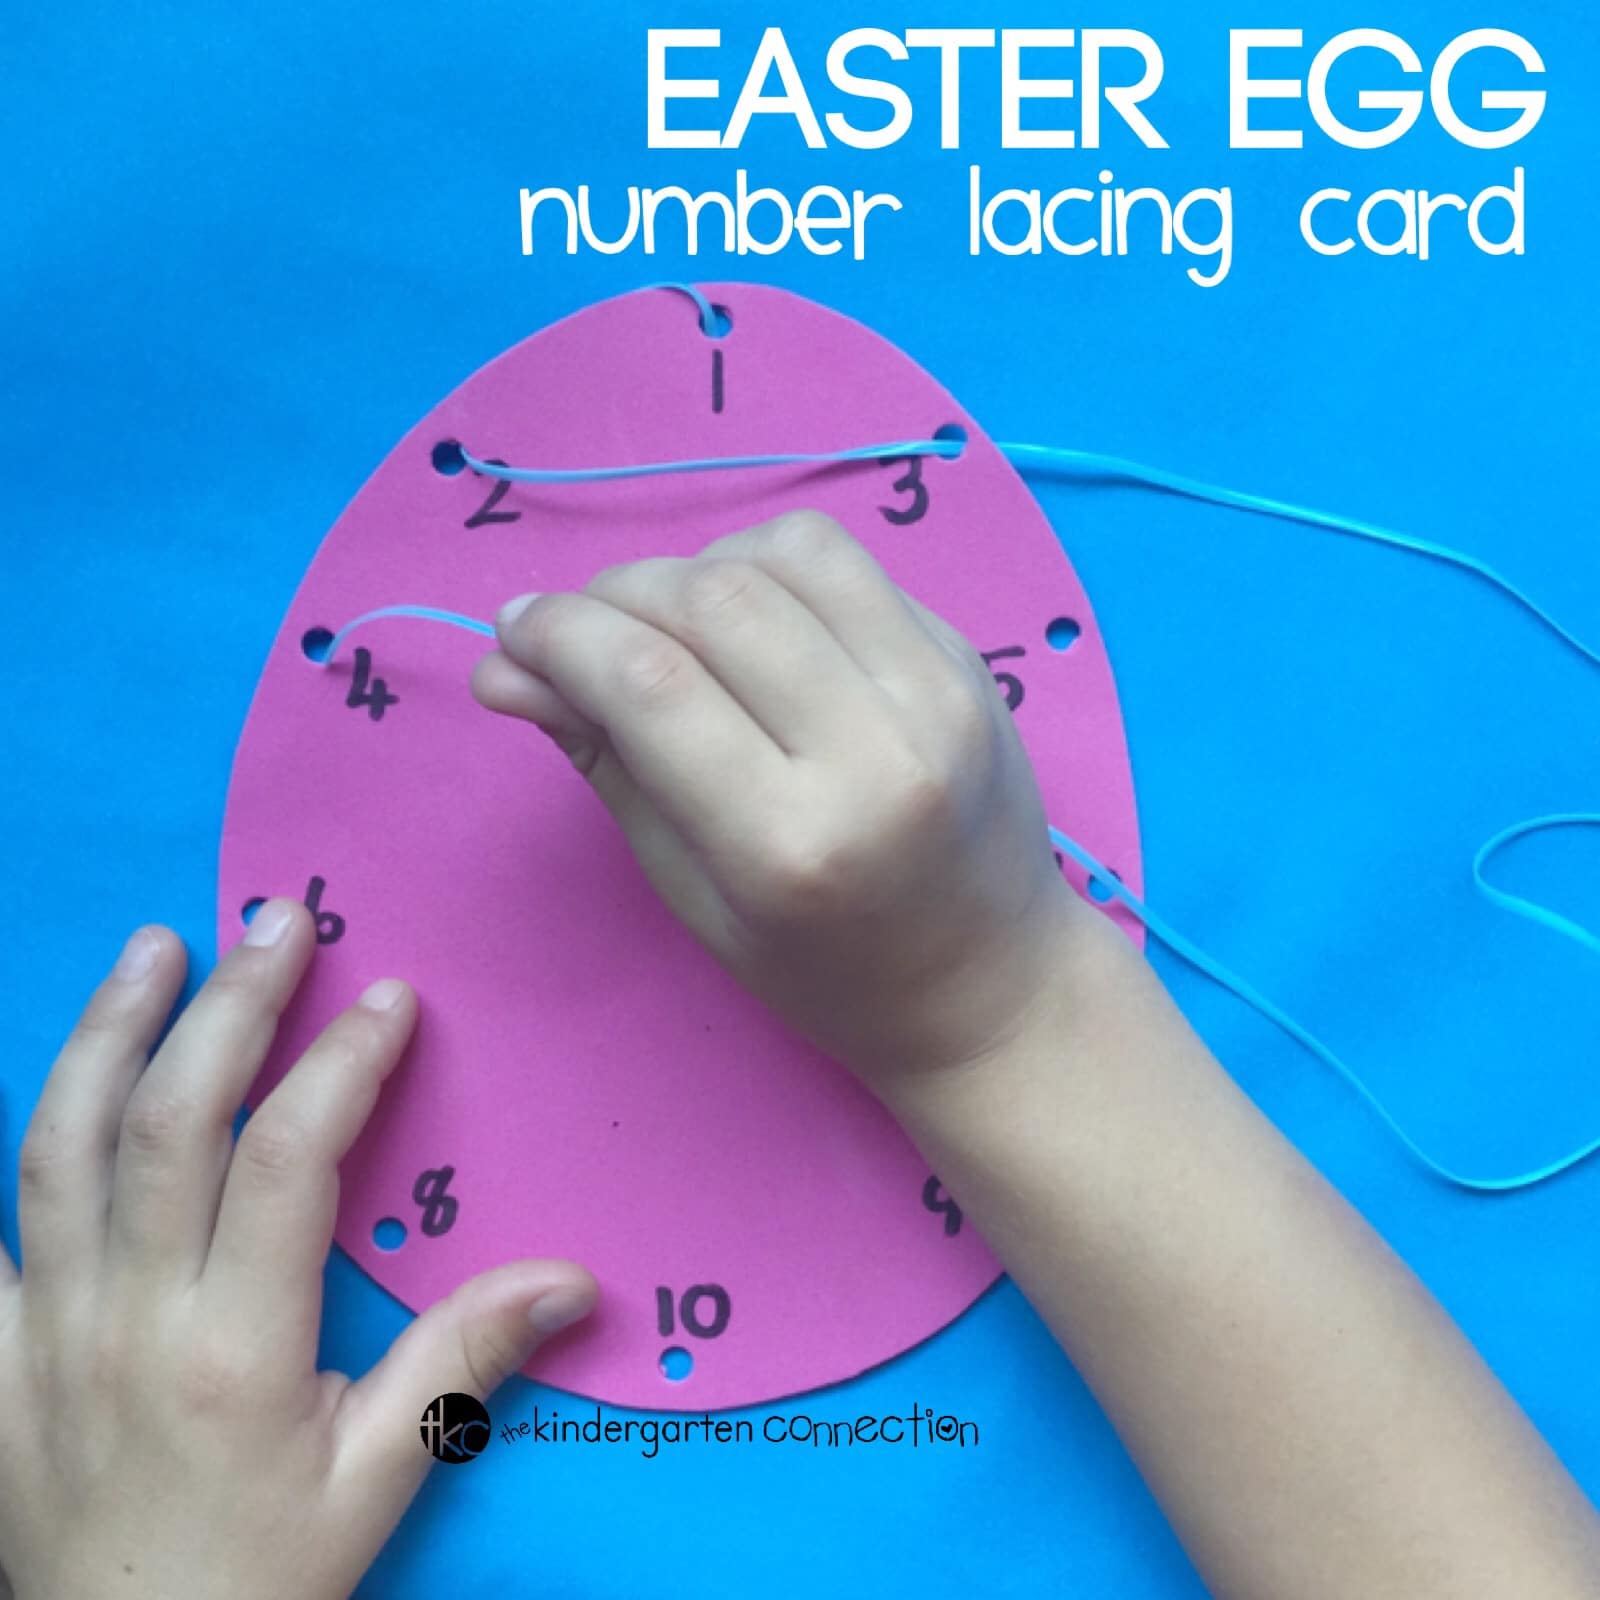 Work on fine motor skills and so much more with these easy DIY Easter egg lacing cards!